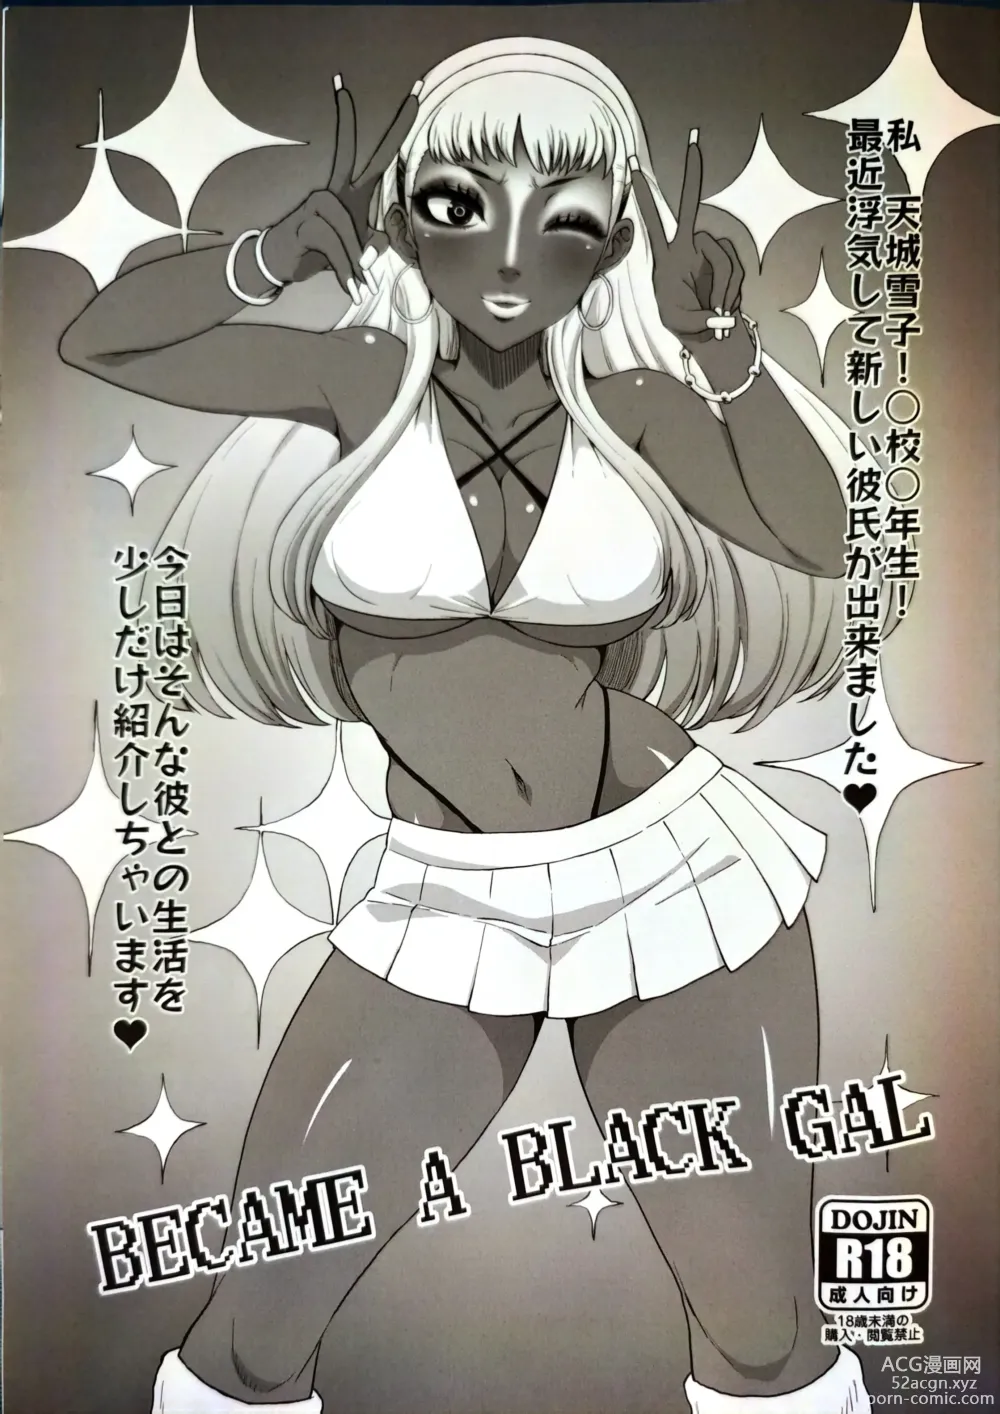 Page 1 of doujinshi BECAME A BLACK GAL